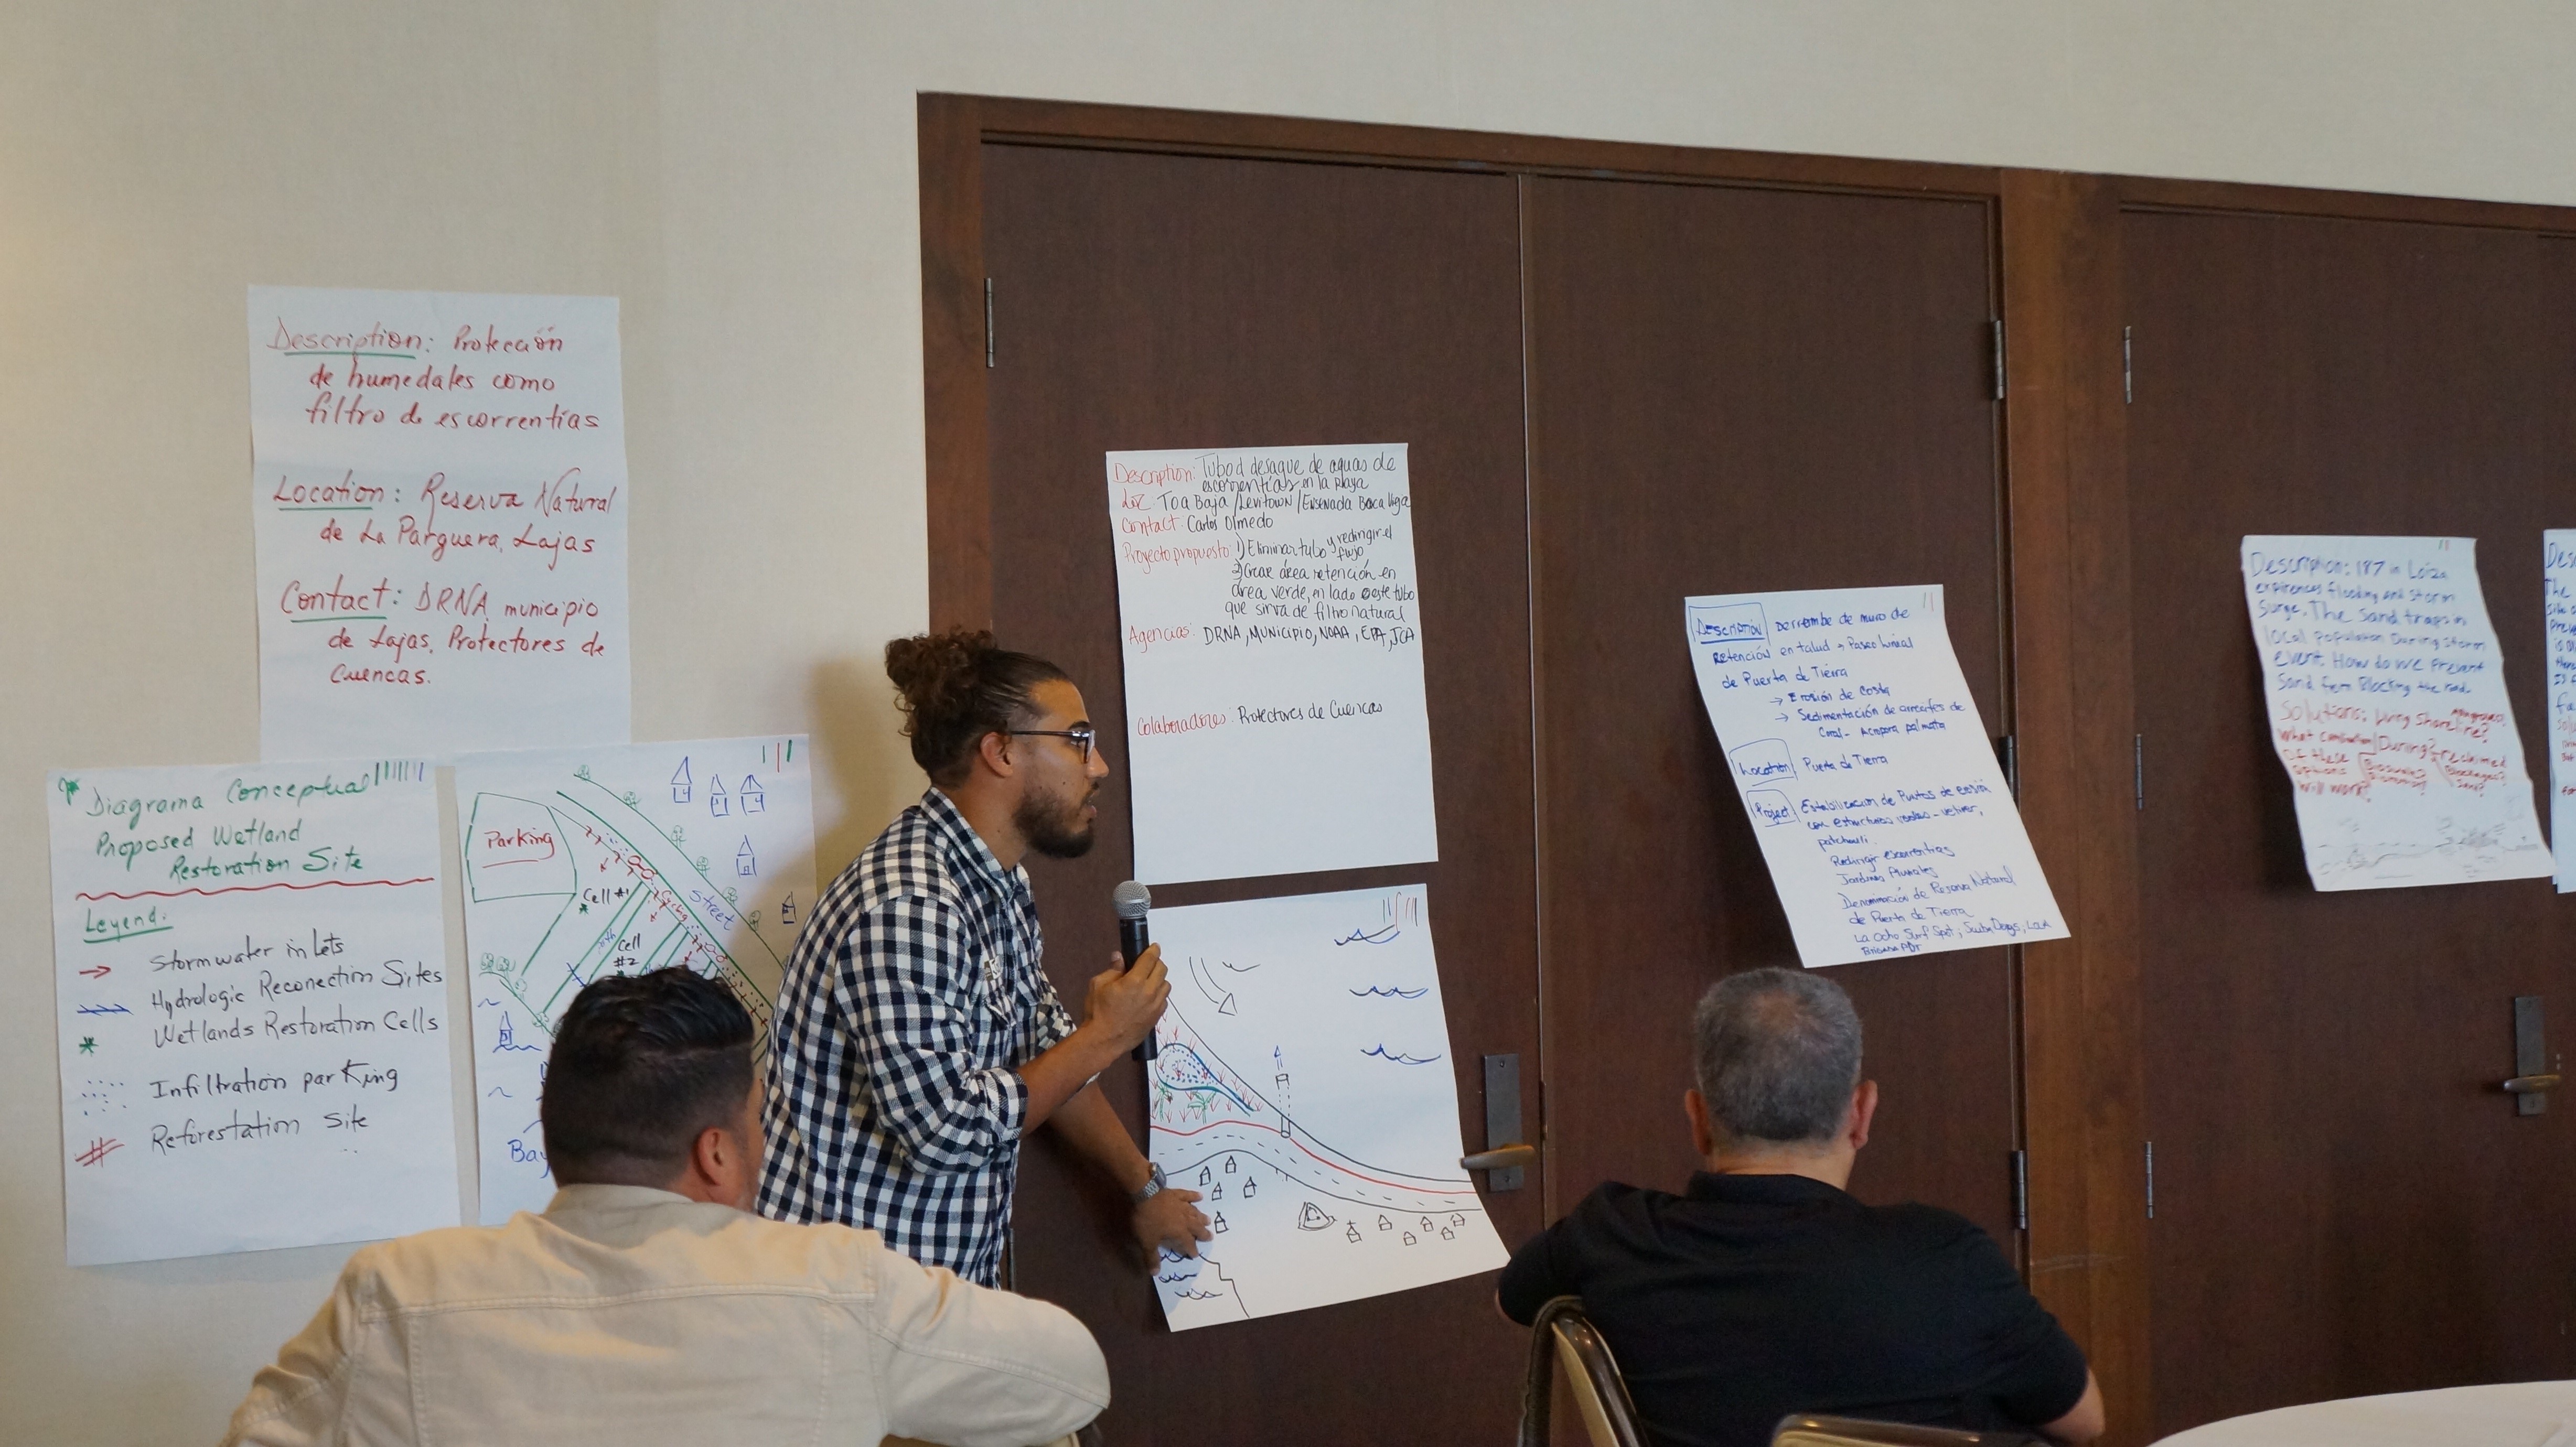 Training participants learn Nature-Based Solutions for Coastal Hazards and project ideas for incorporating green infrastructure